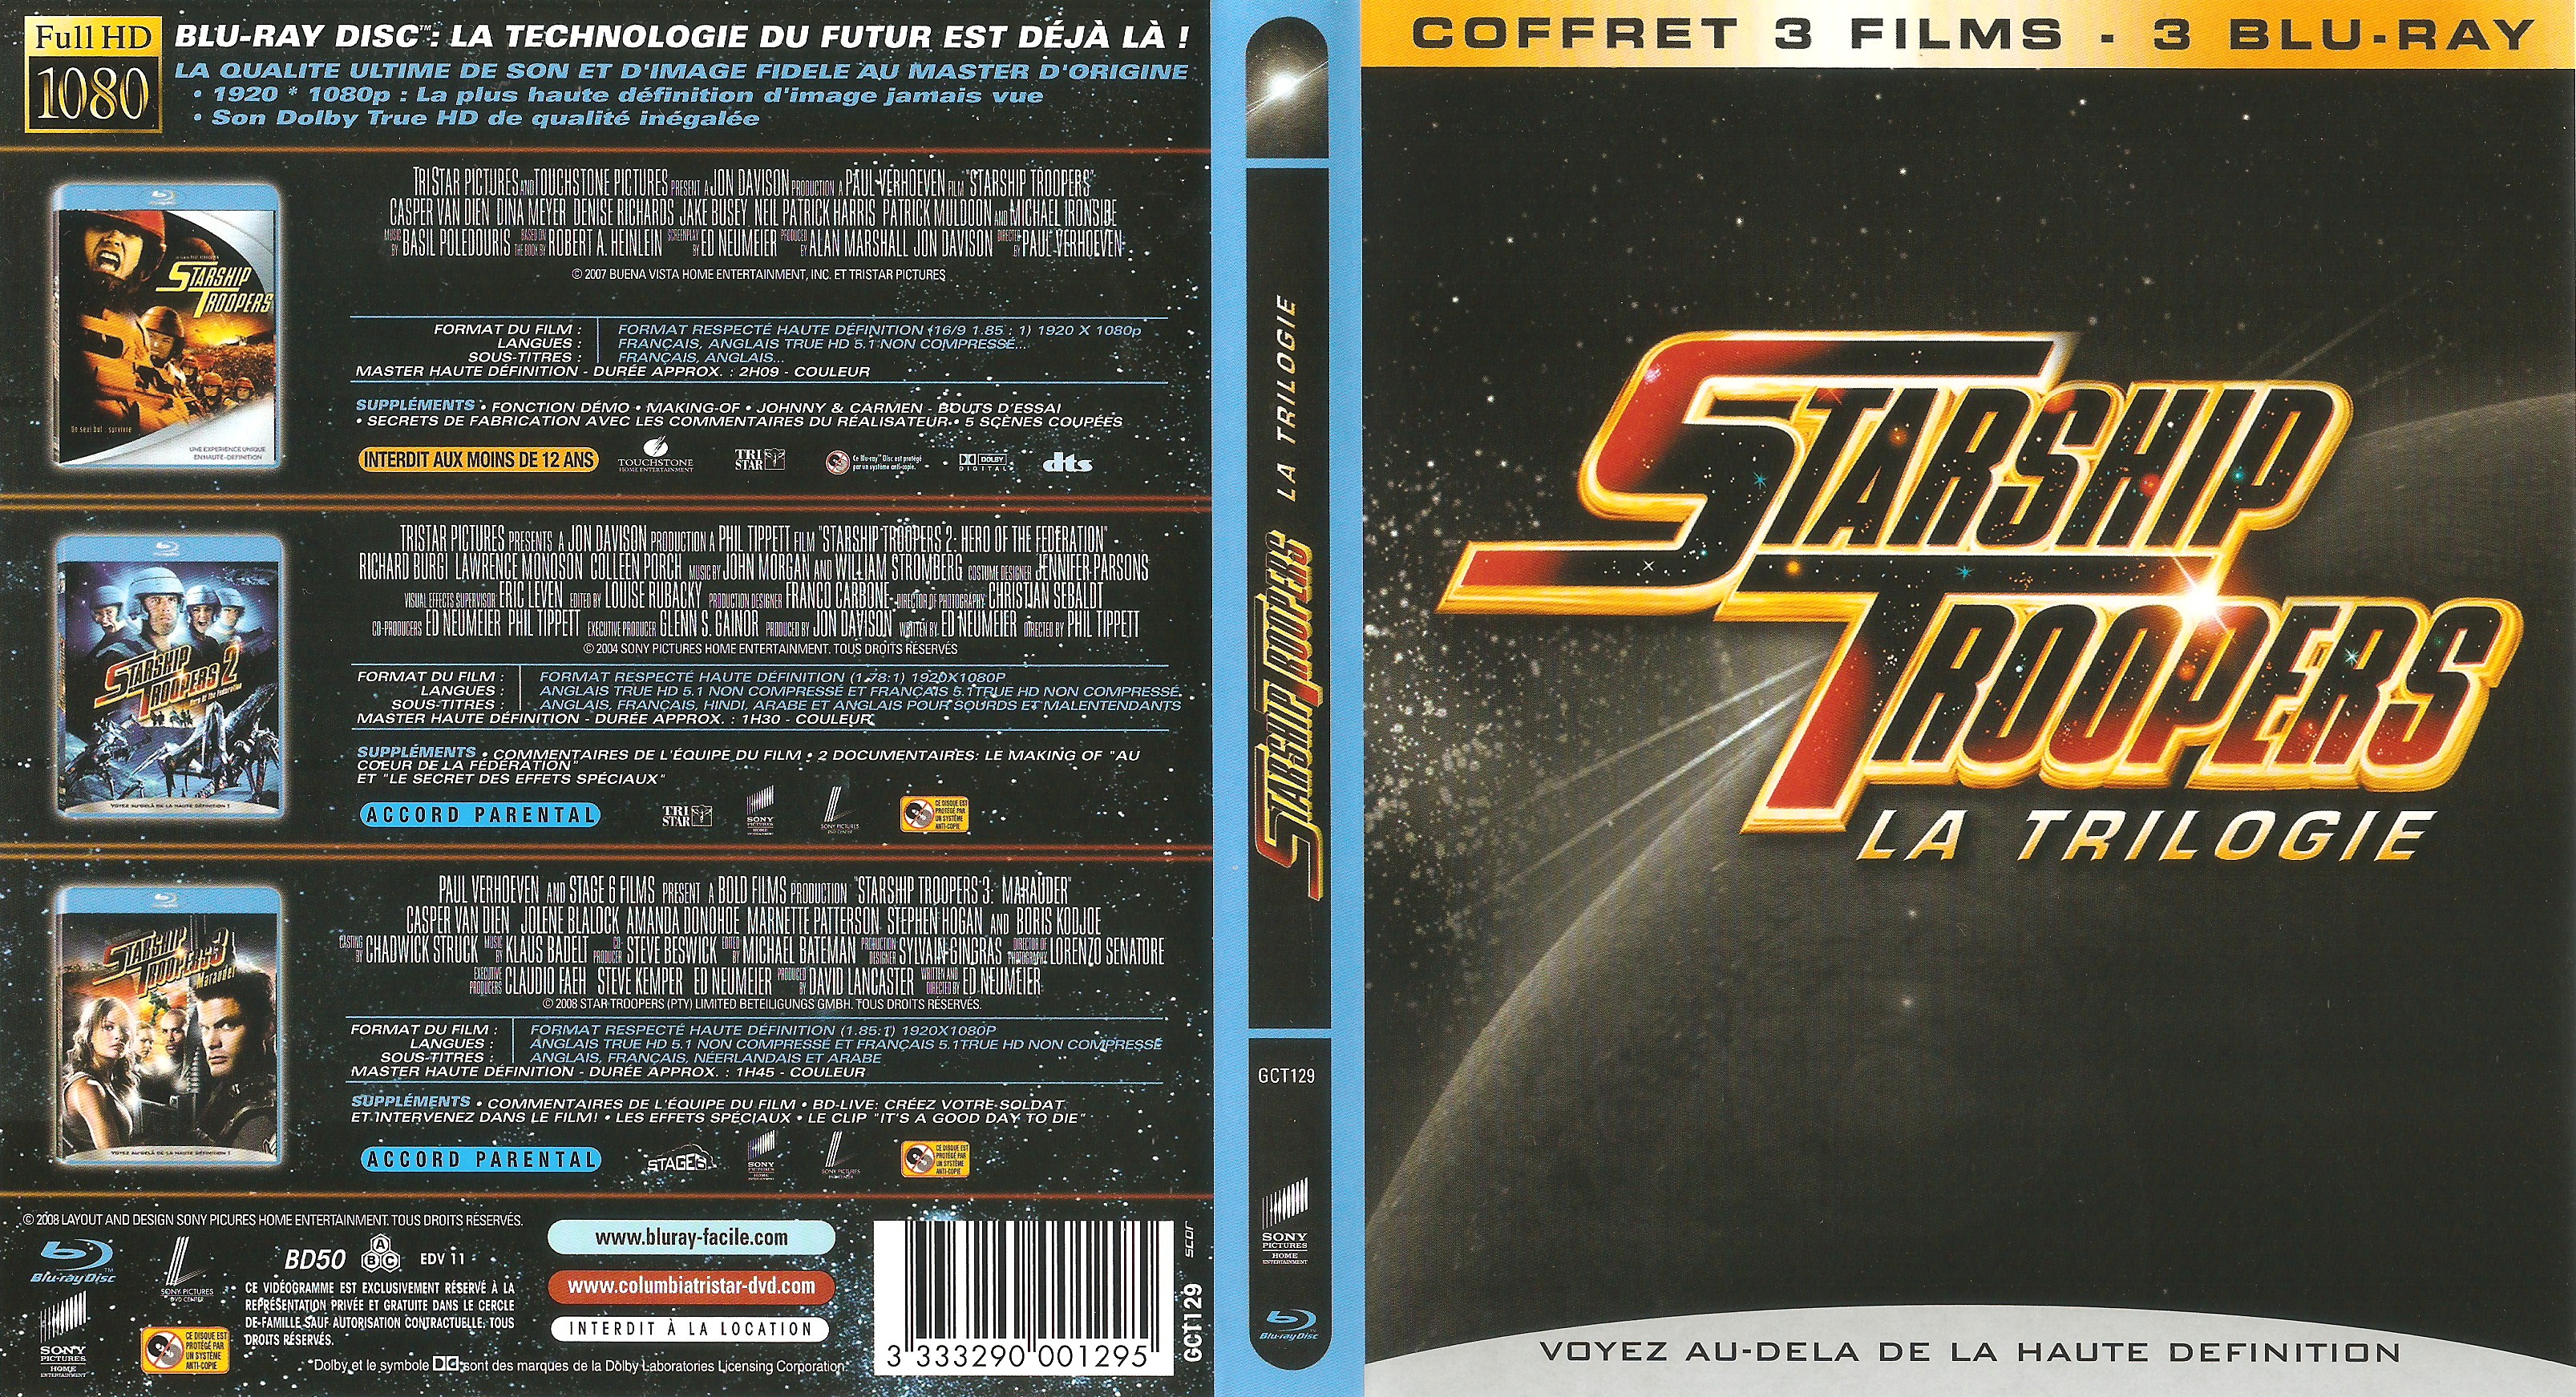 Jaquette DVD Starship Troopers Trilogie (BLU-RAY)